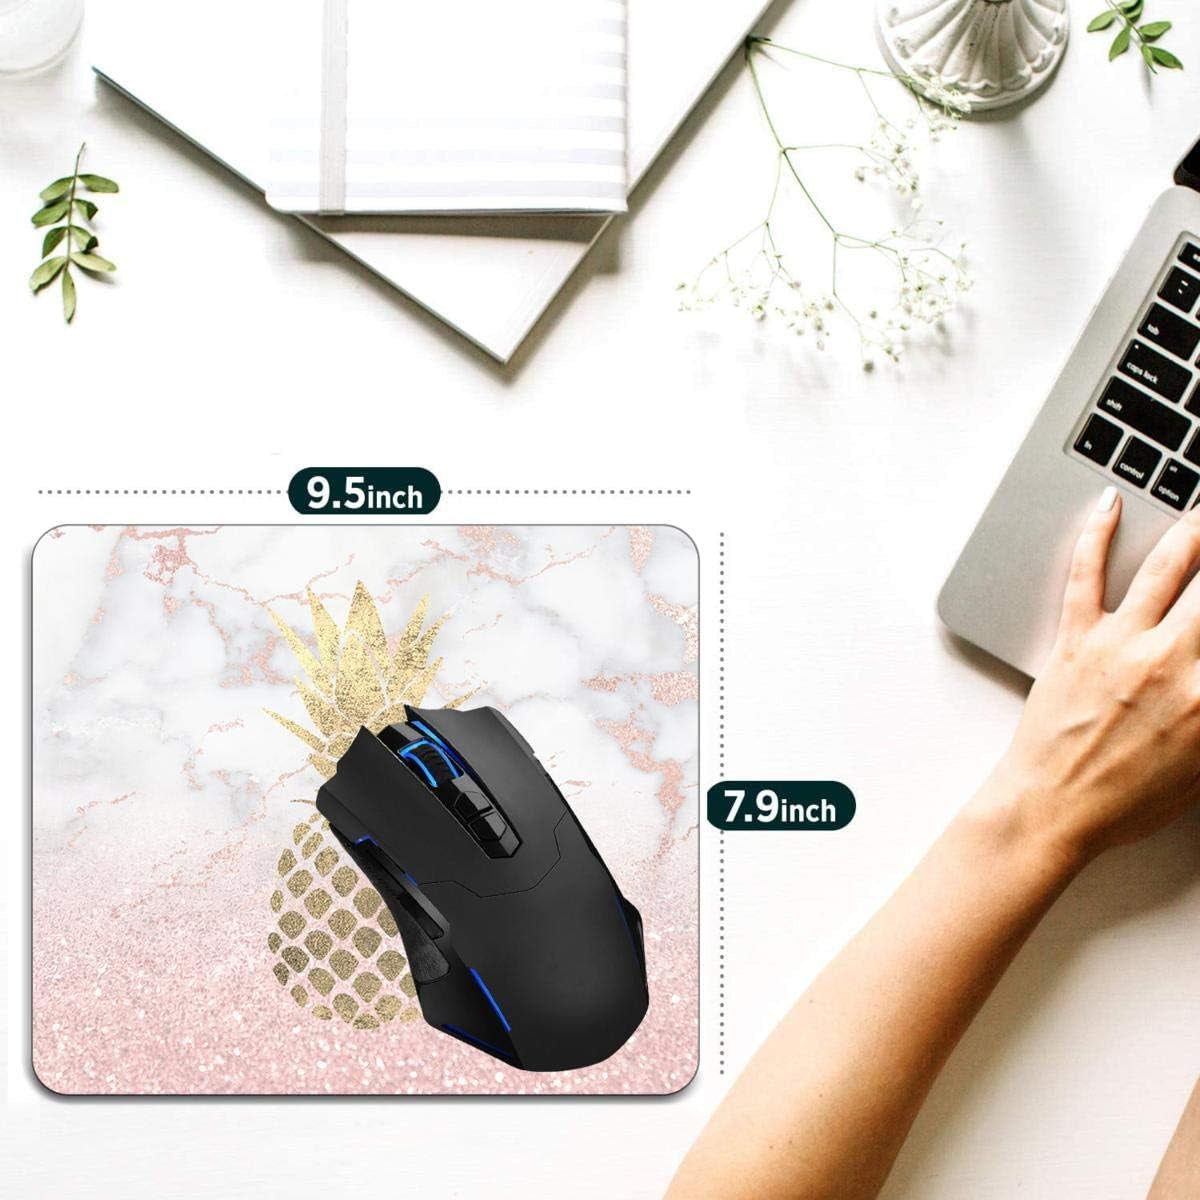 Mouse Pad,Pineapple on Marble Computer Mouse Pads Desk Accessories Non-Slip Rubber Base,Mousepad for Laptop Mouse